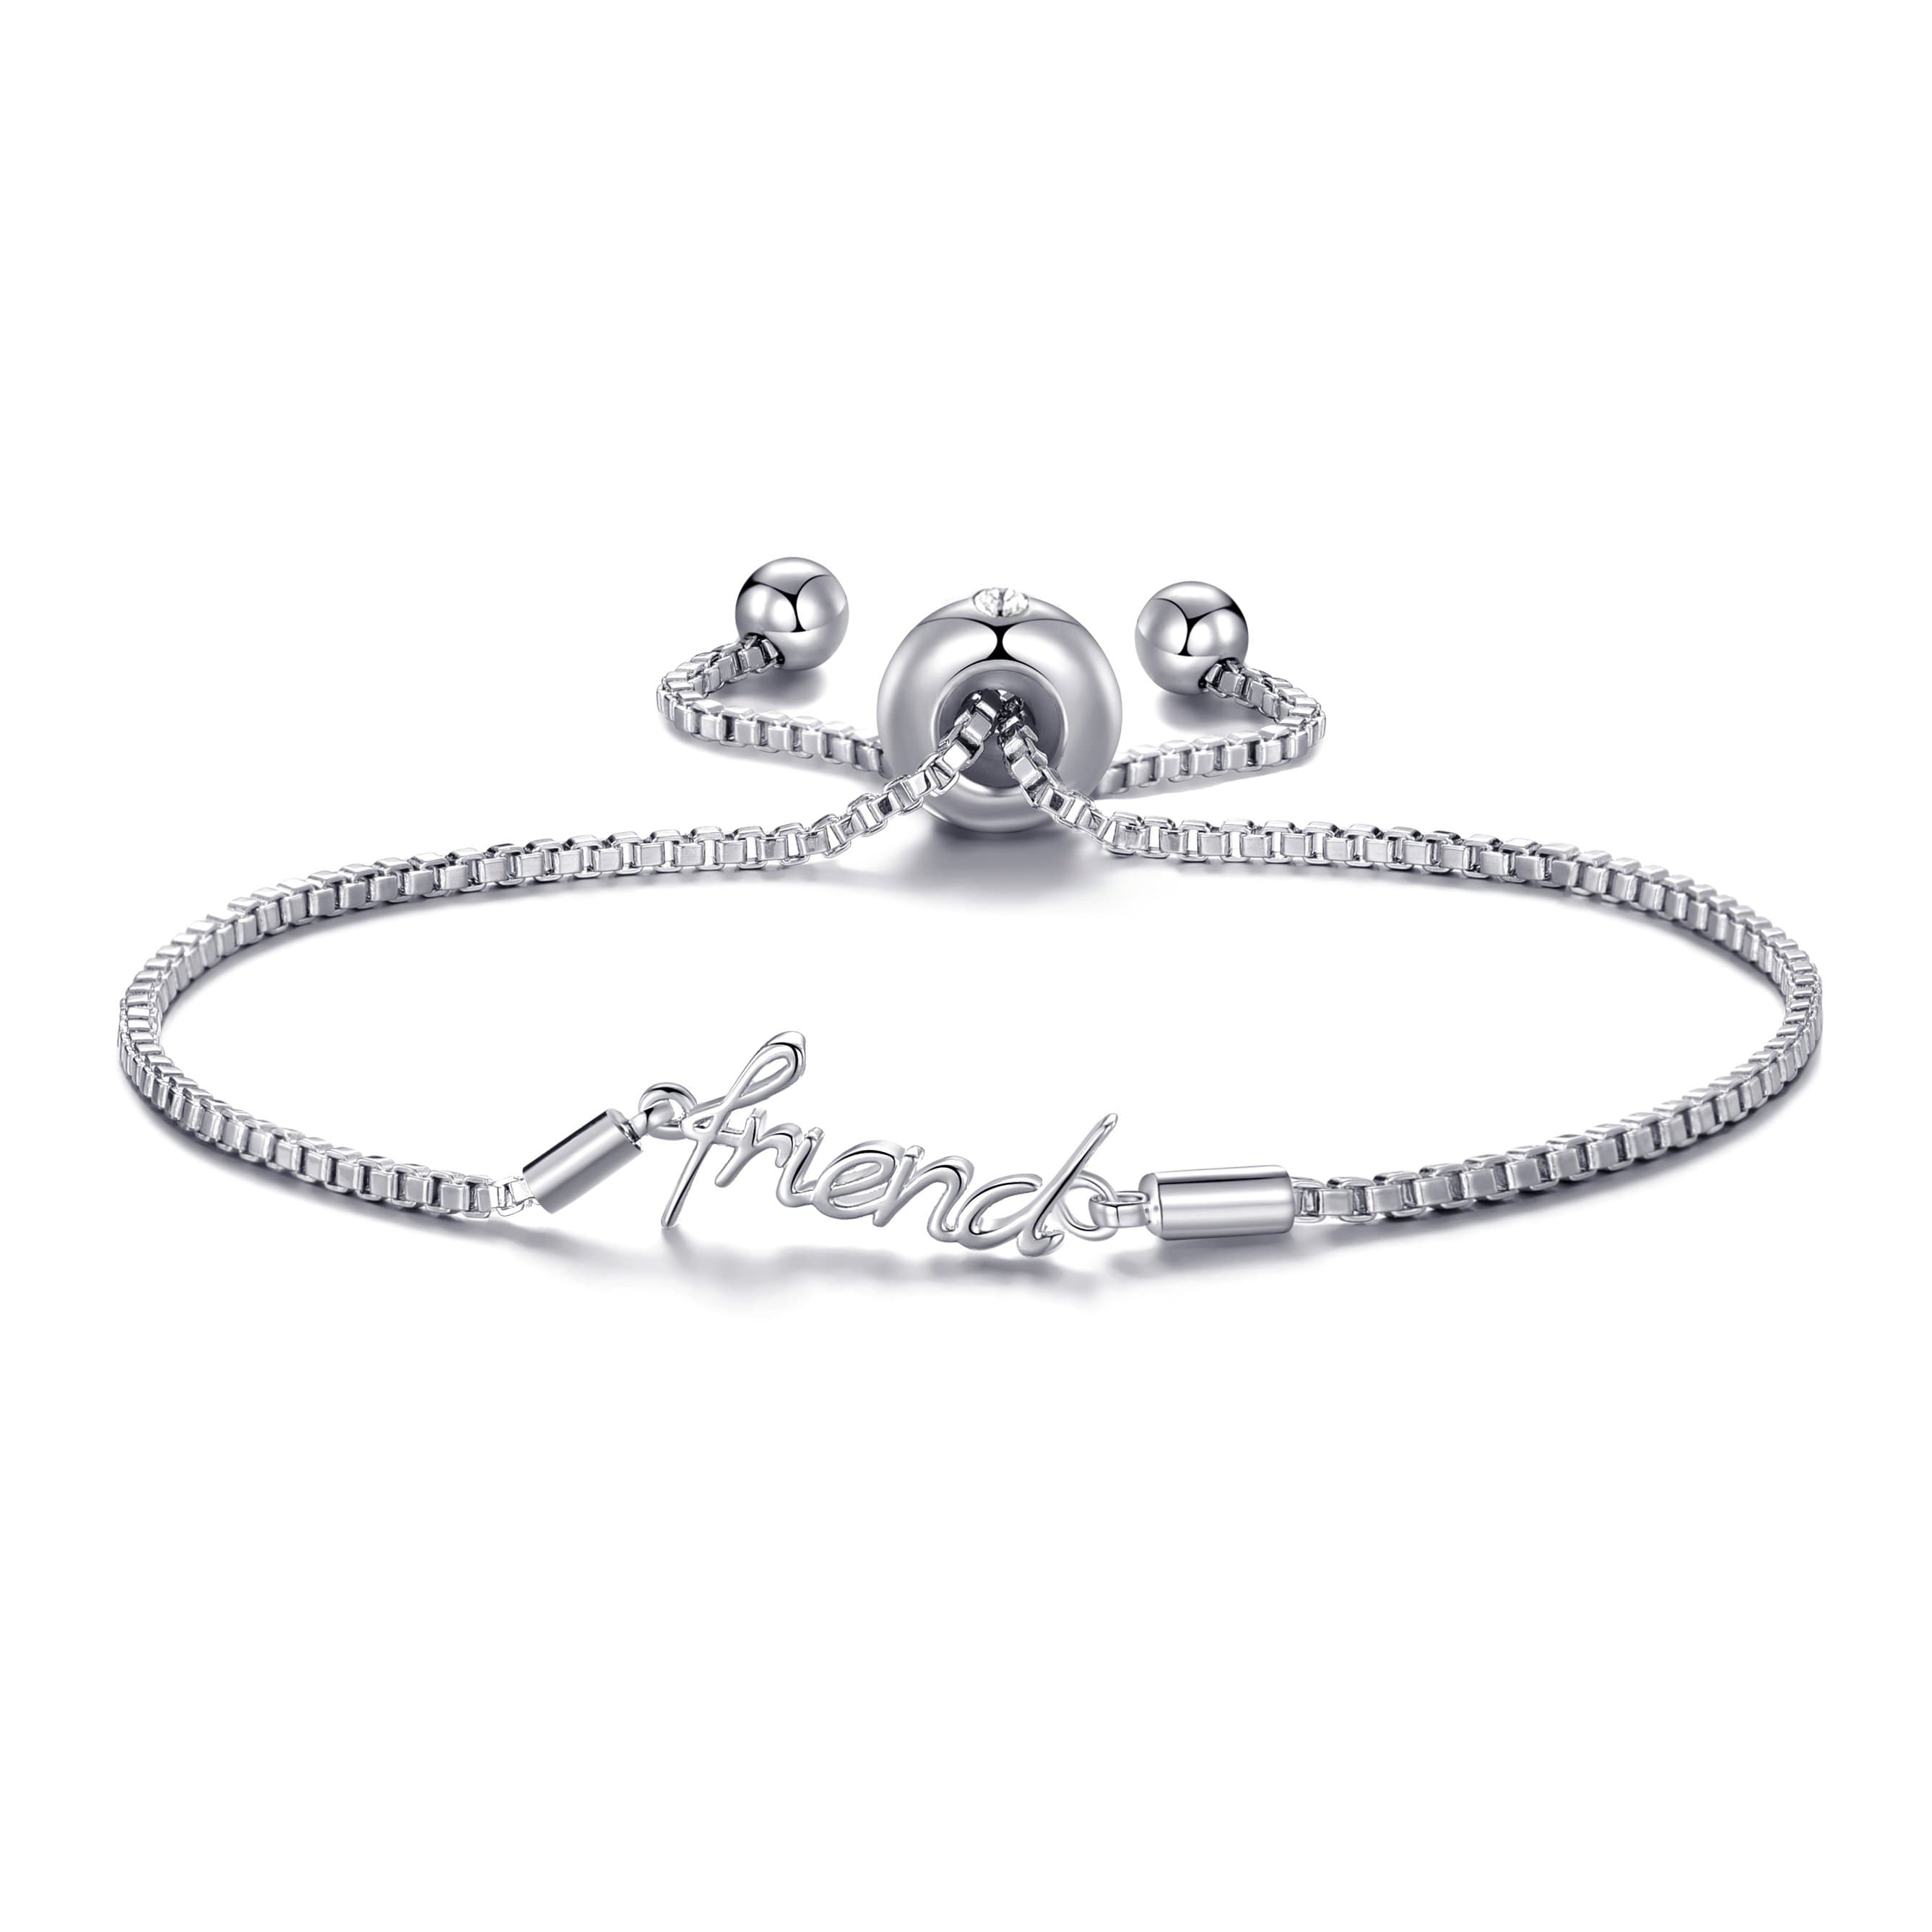 Silver Plated Friend Bracelet Created with Zircondia® Crystals by Philip Jones Jewellery